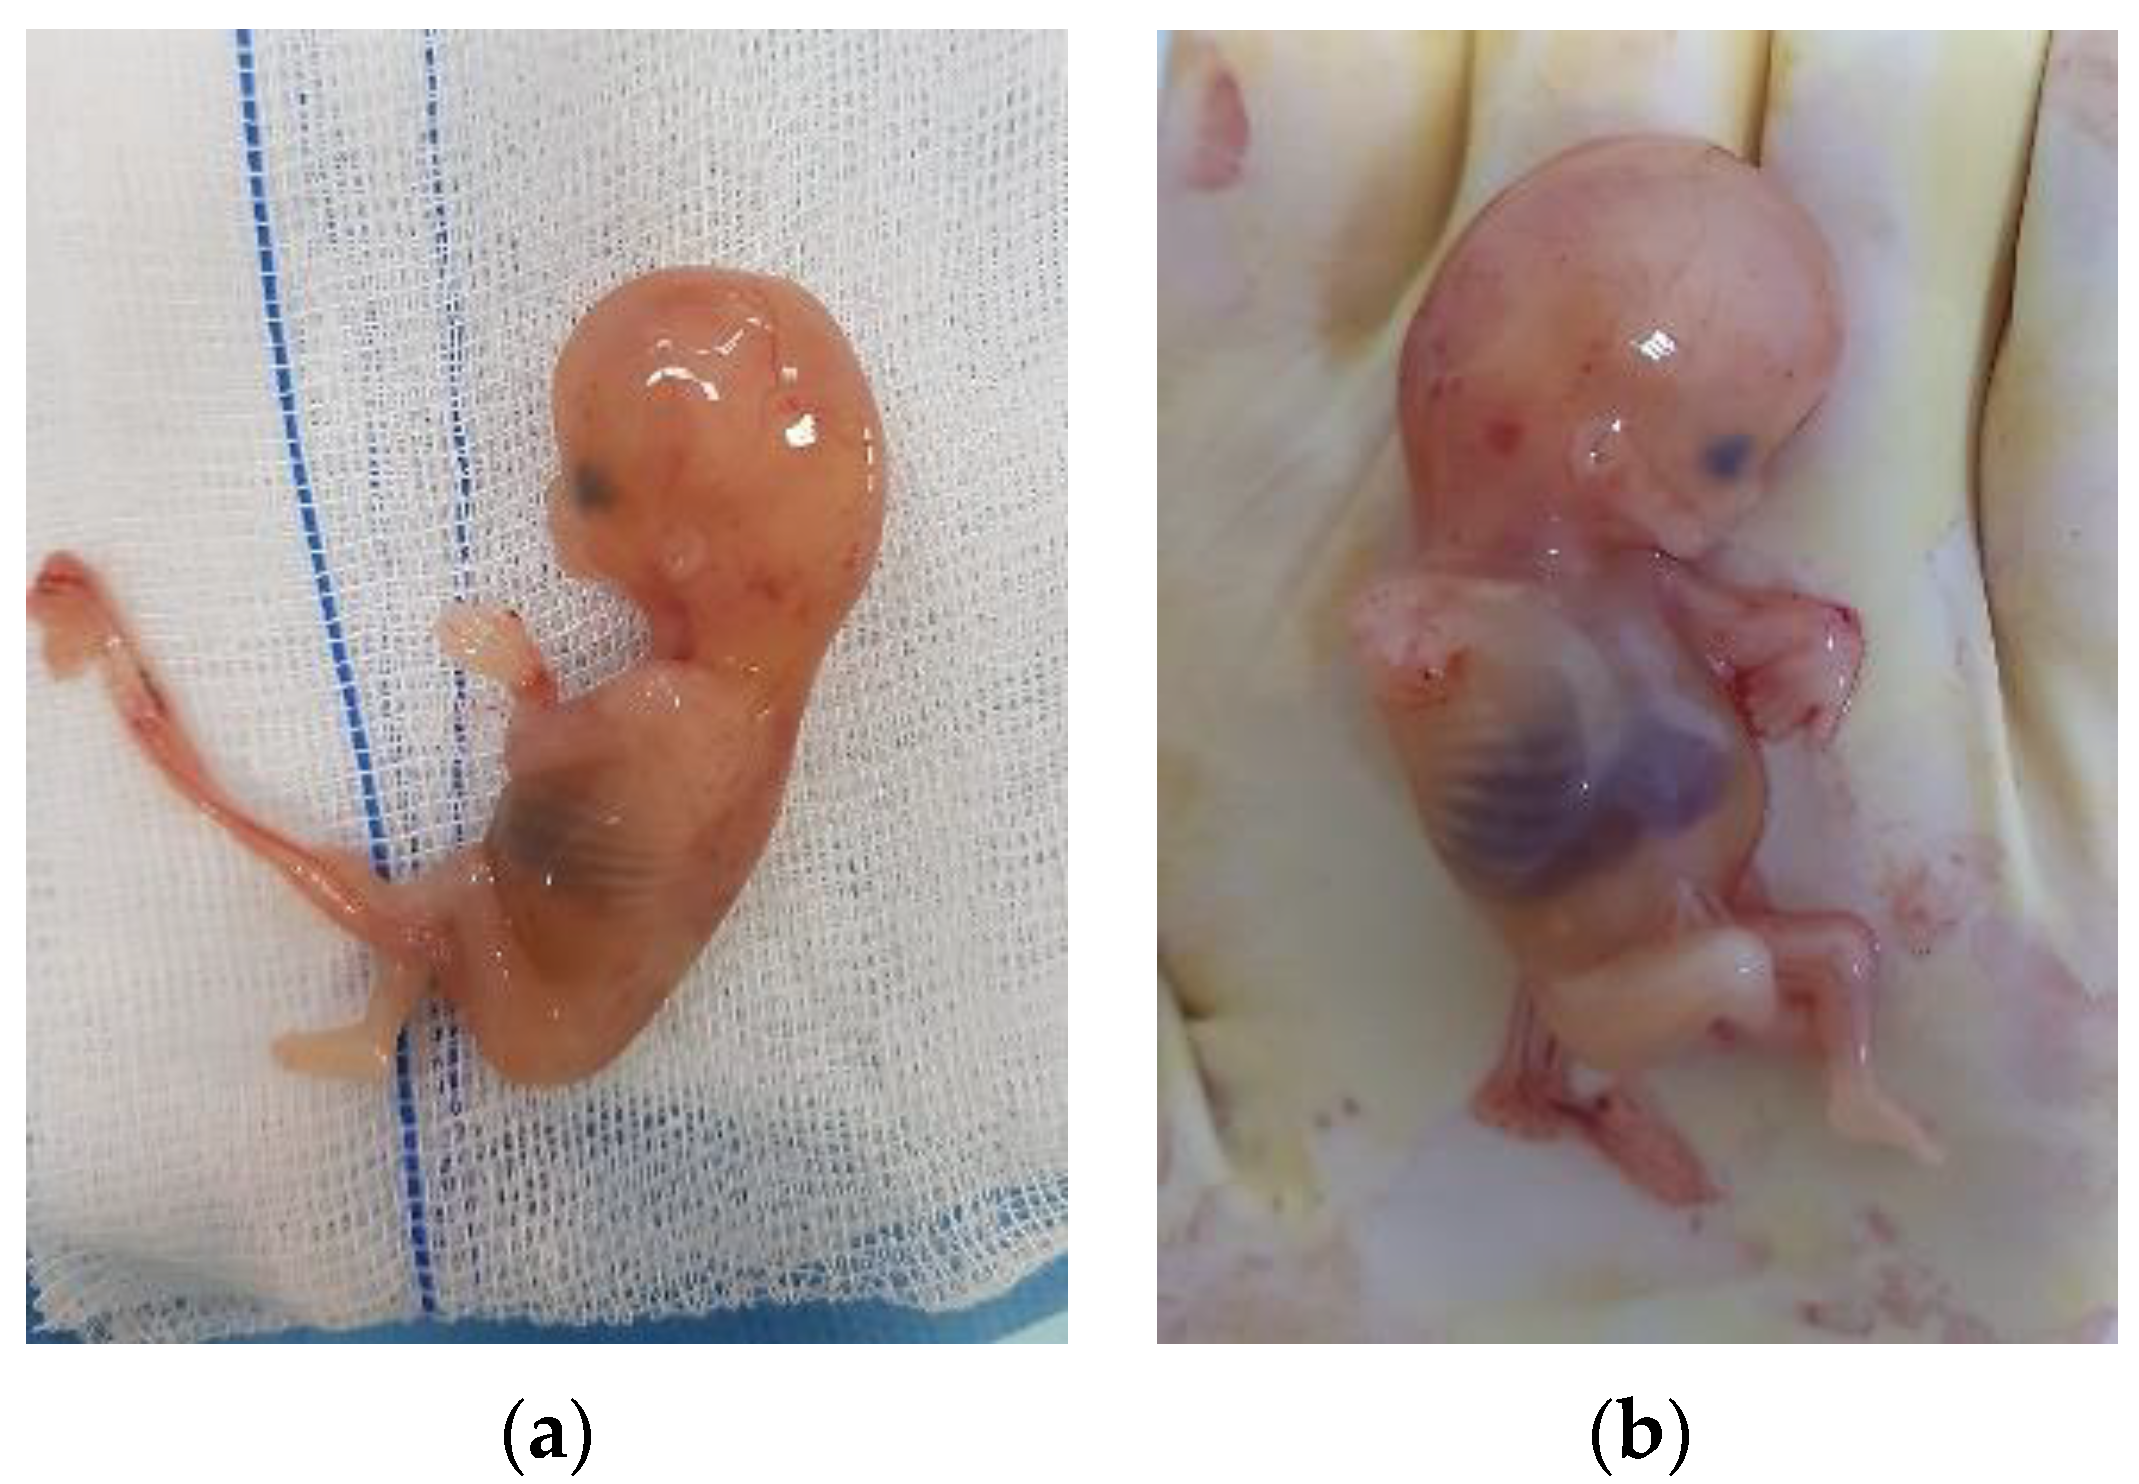 Thirty-seven-year-old female with ruptured ectopic pregnancy